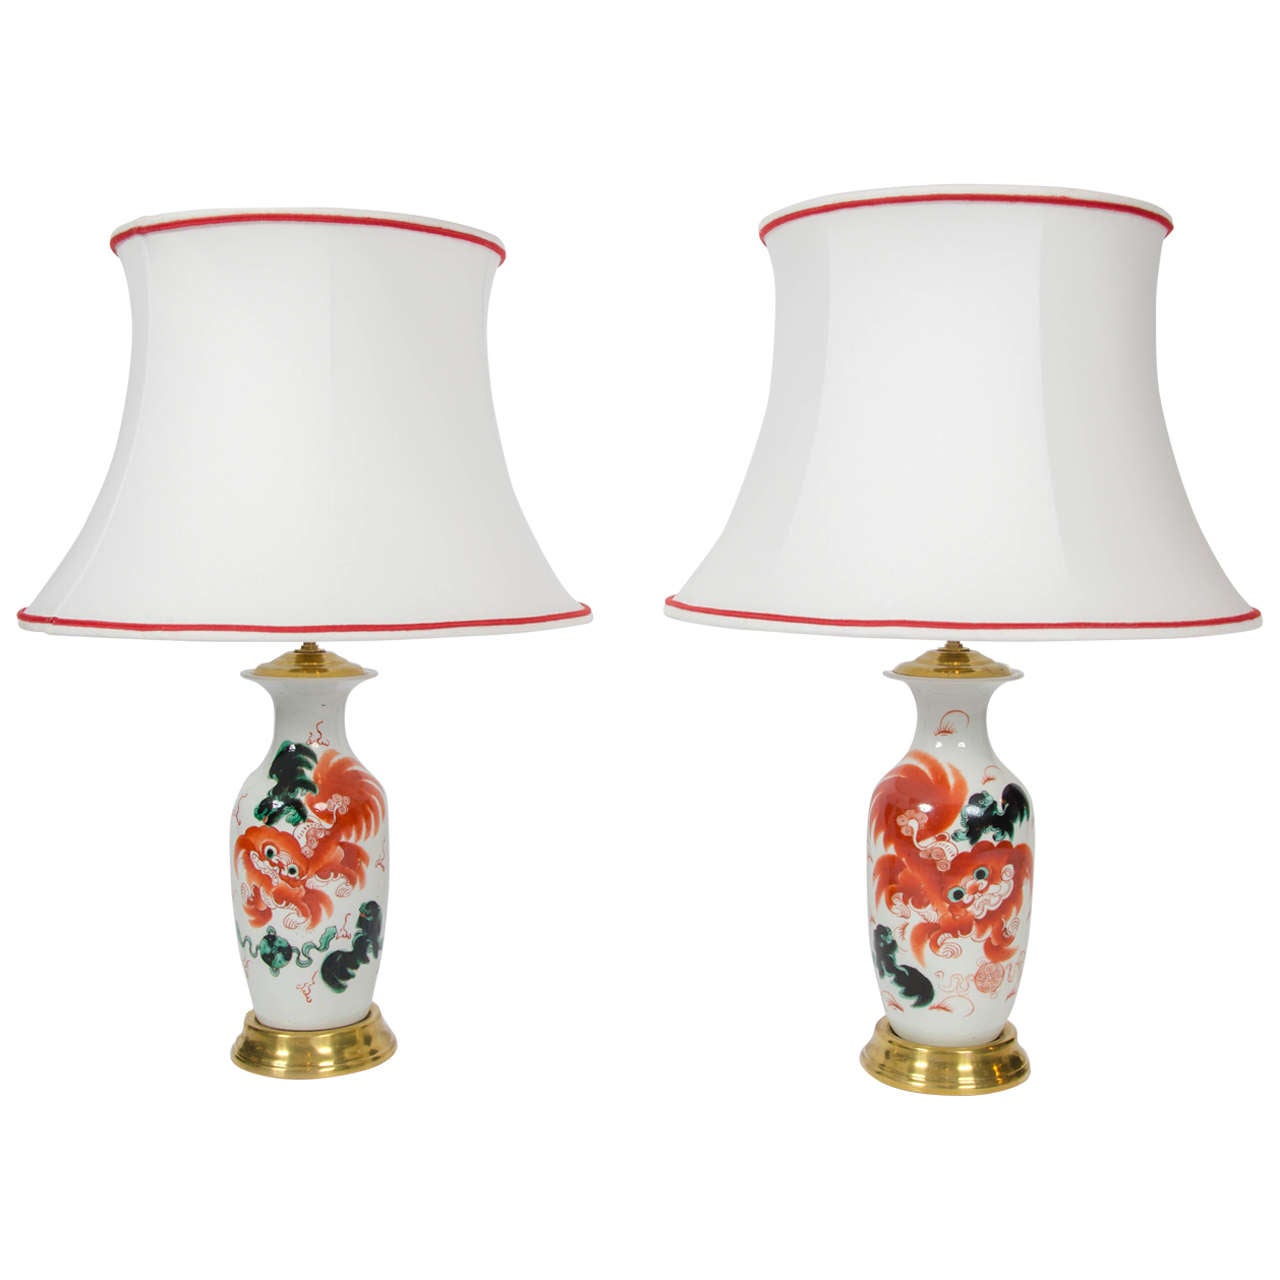 Pair of late 19th century Chinese Porcelain Vases as Table Lamps For Sale